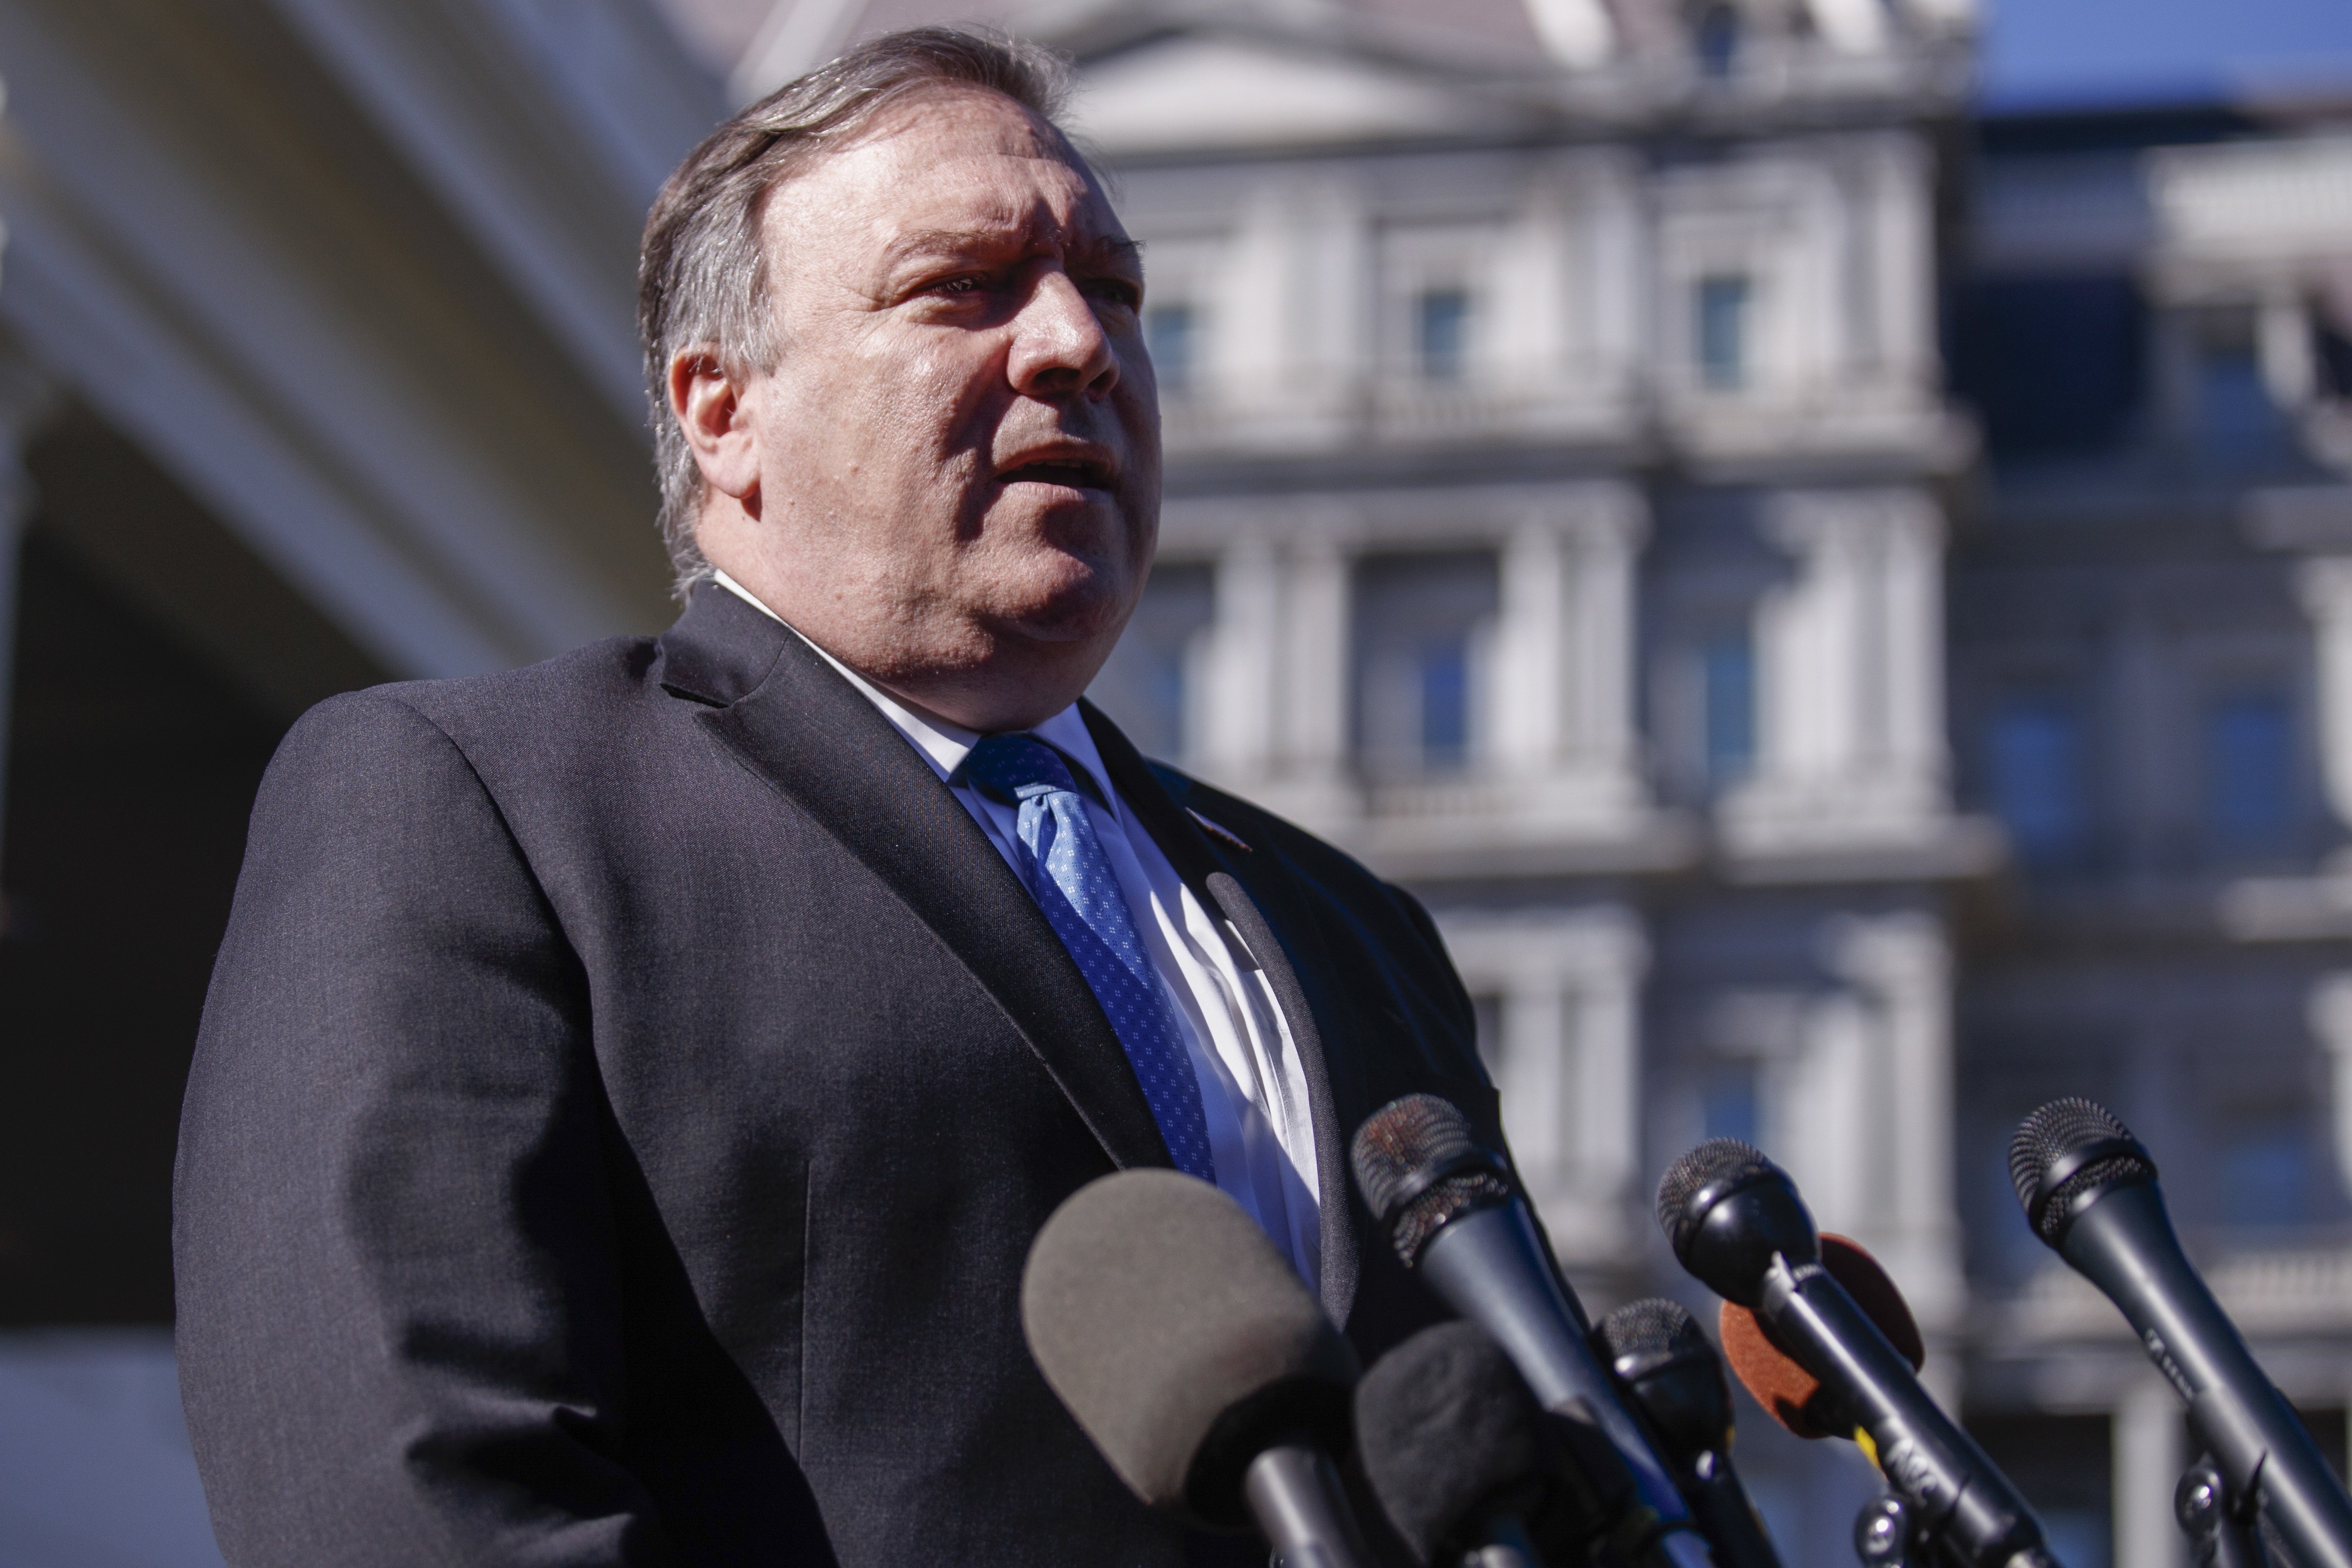 epa07102272 US Secretary of State Mike Pompeo responds to a question from the news media following a meeting with US President Donald J. Trump about missing Saudi Arabian journalist Jamal Khashoggi outside the White House in Washington, DC, USA, 18 October 2018. Secretary Pompeo returned yesterday from Saudi Arabia where he met with Crown Prince Mohammed bin Salmanand and Turkey where he met with President Recep Tayyip Erdogan and Foreign Minister Mevlut Cavusoglu.  EPA/SHAWN THEW